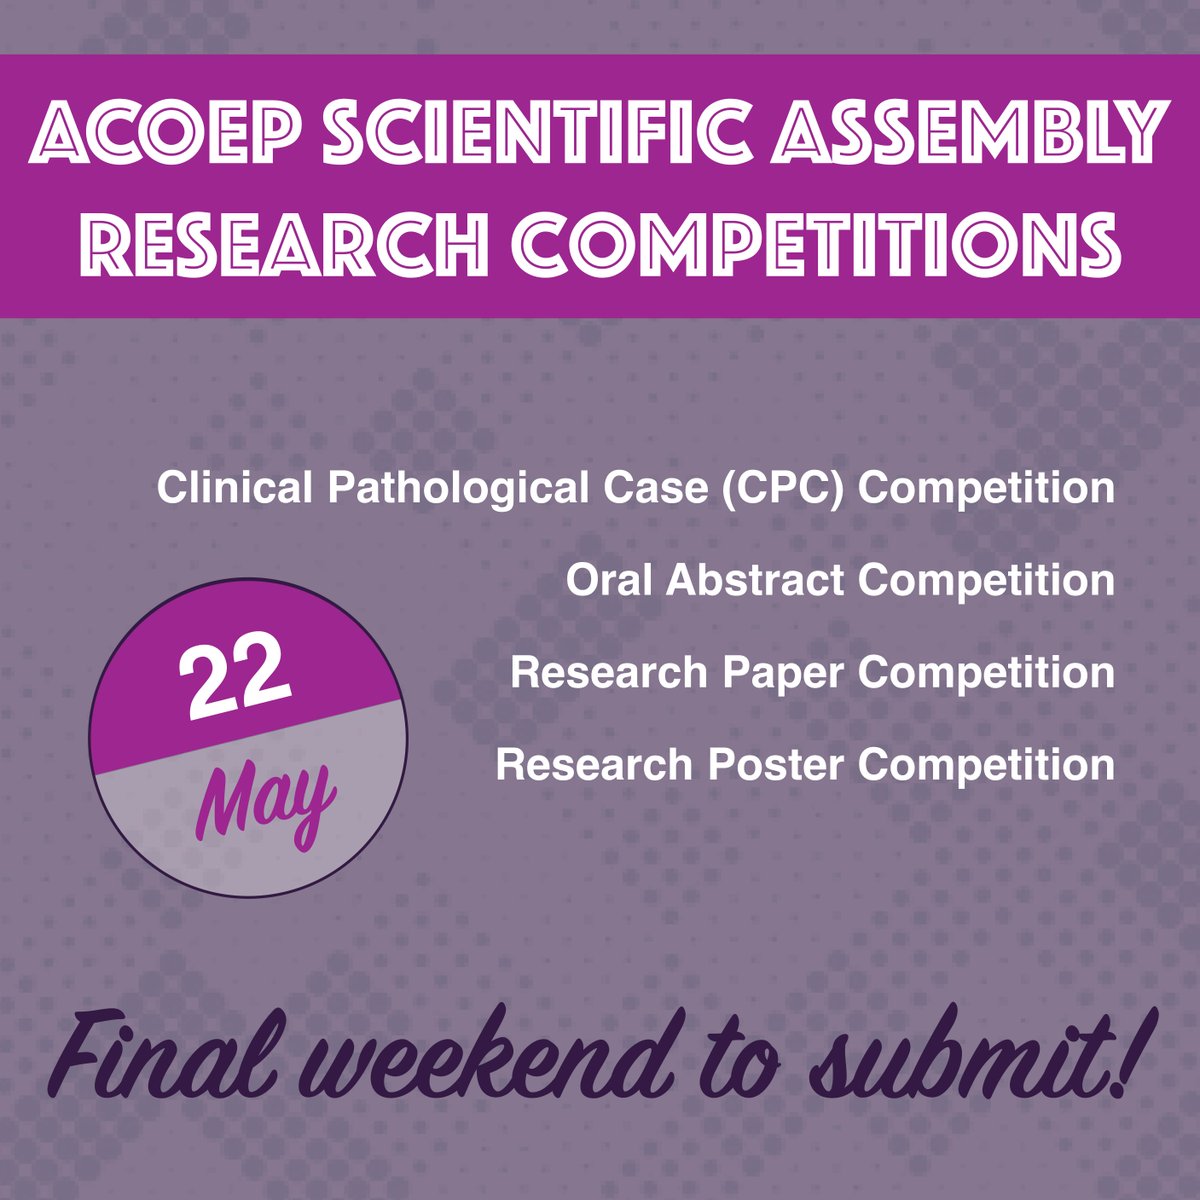 FINAL WEEKEND!! Don't miss out on the opportunity to participate in our research competitions for SA23! Present live and win great prizes! Deadline is Monday, May 22nd. #ACOEP23 ow.ly/3NXa50O2uu7